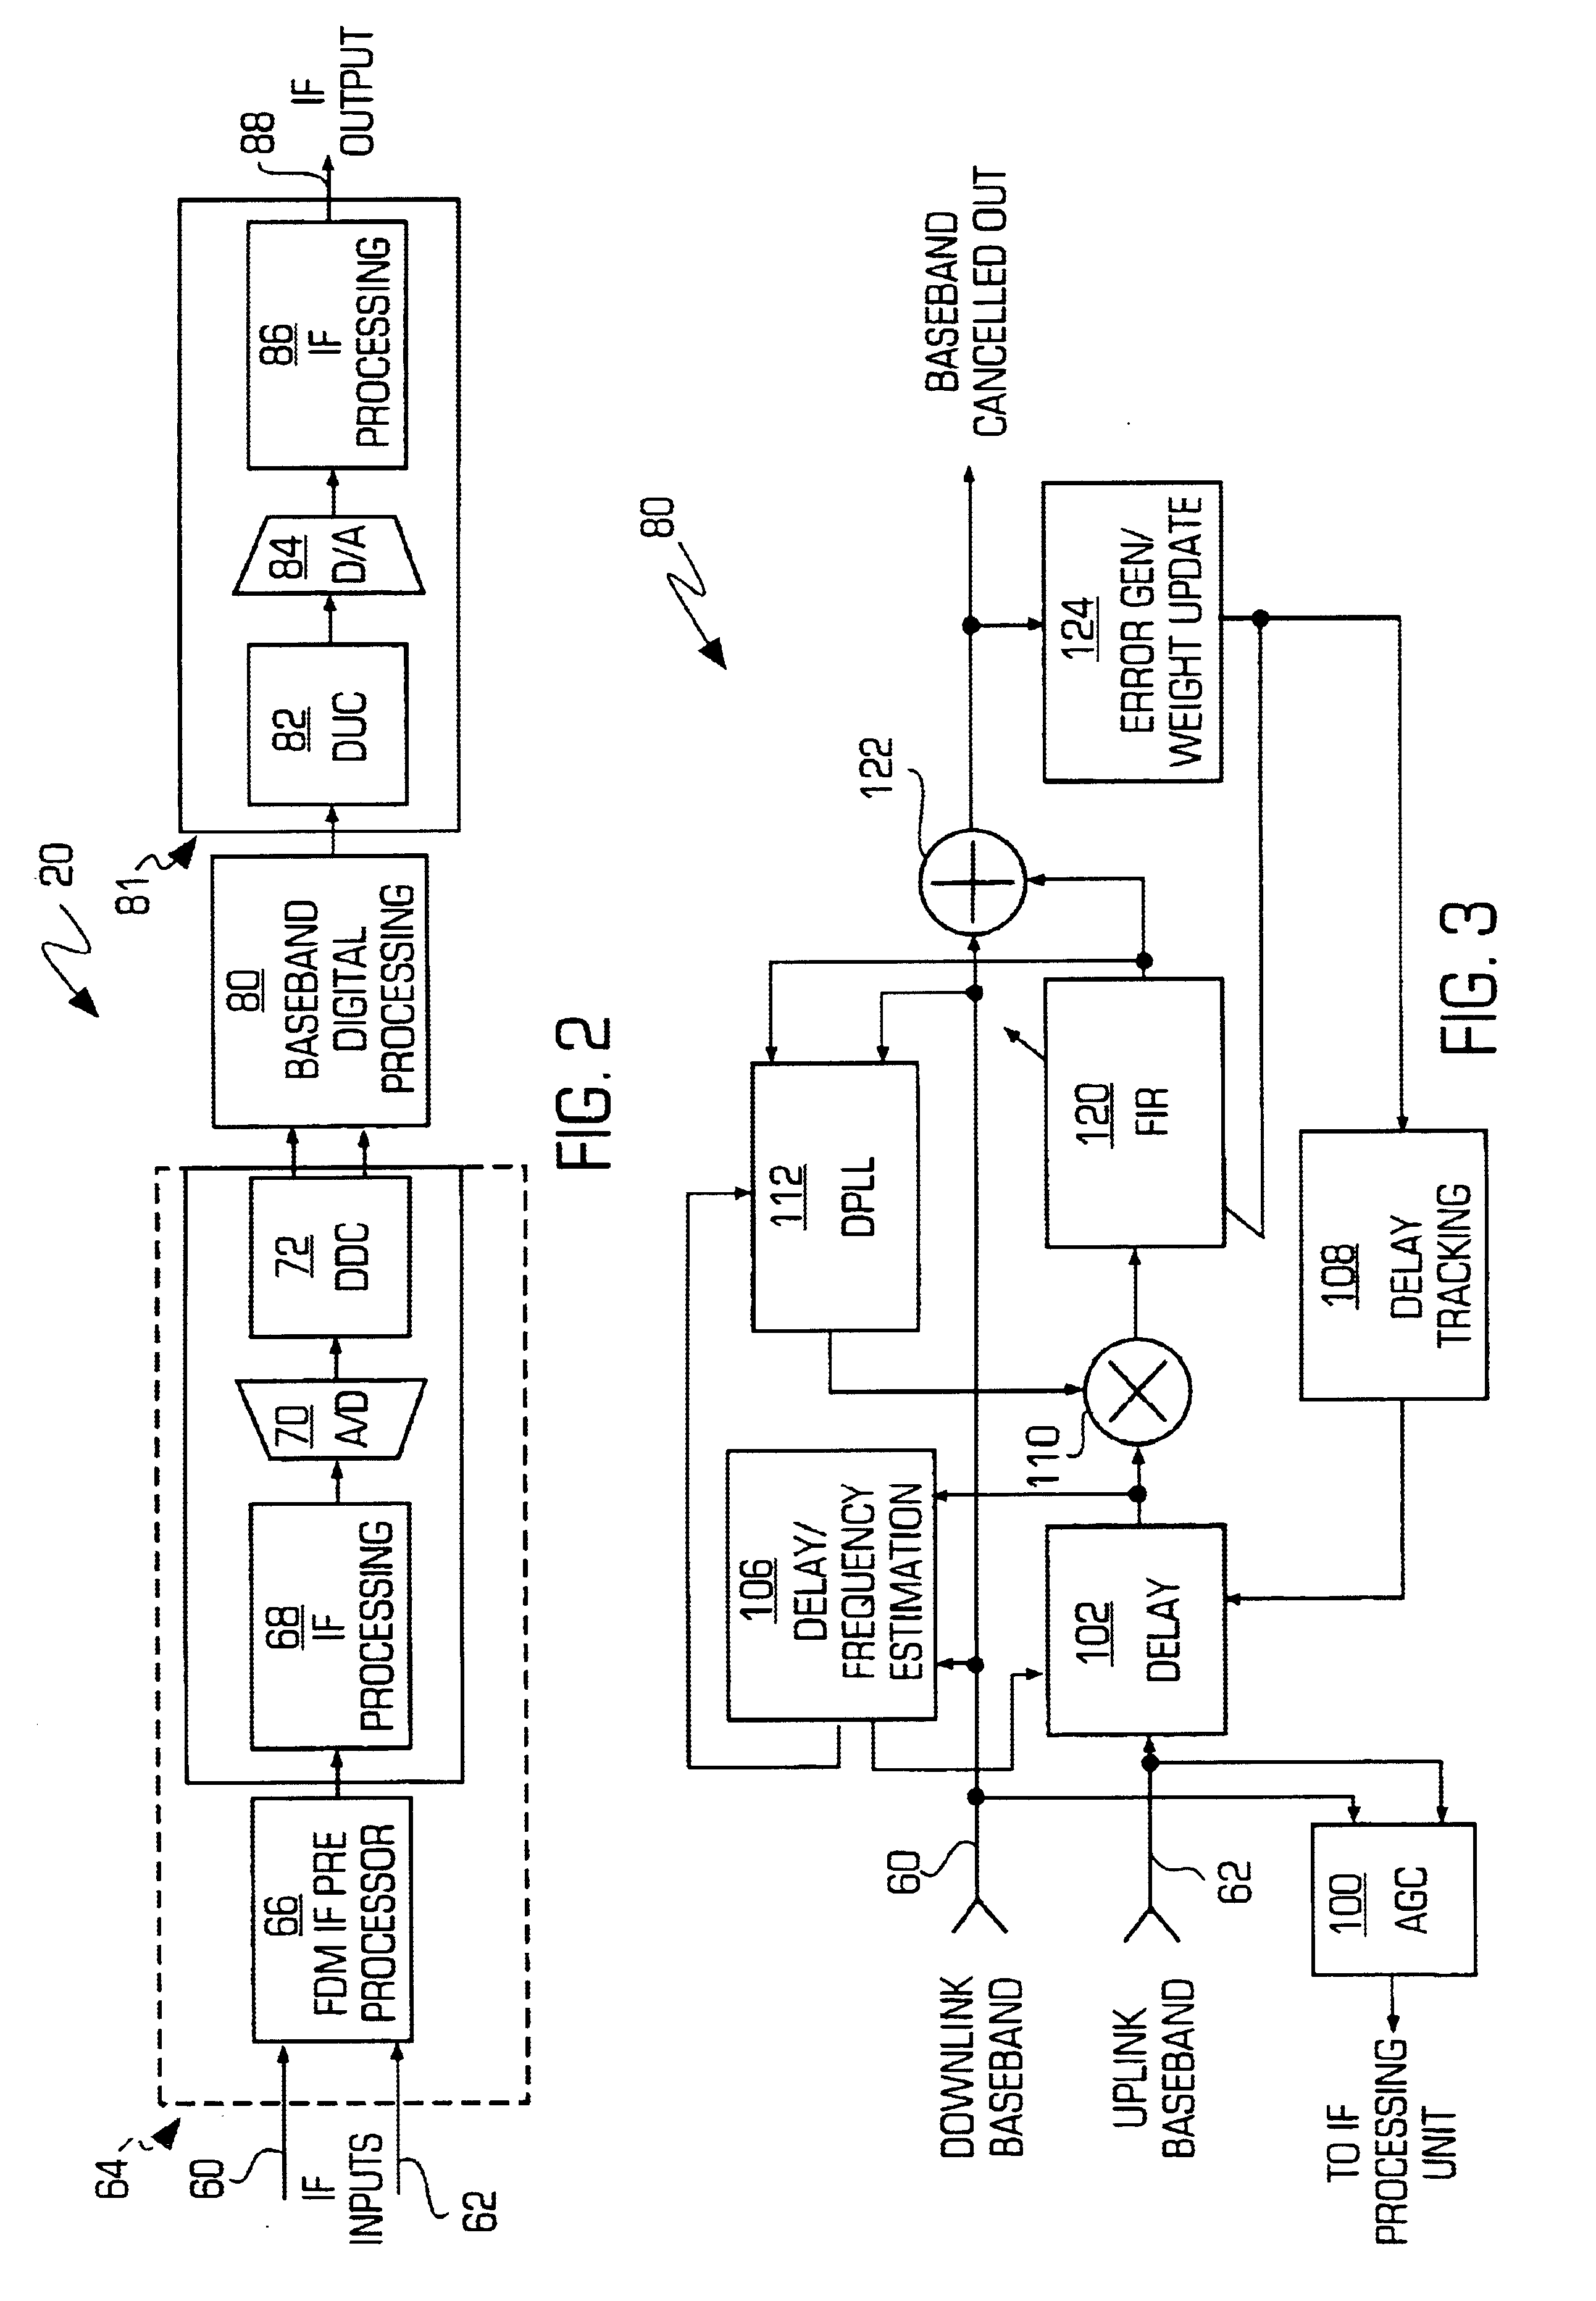 Adaptive canceller for frequency reuse systems